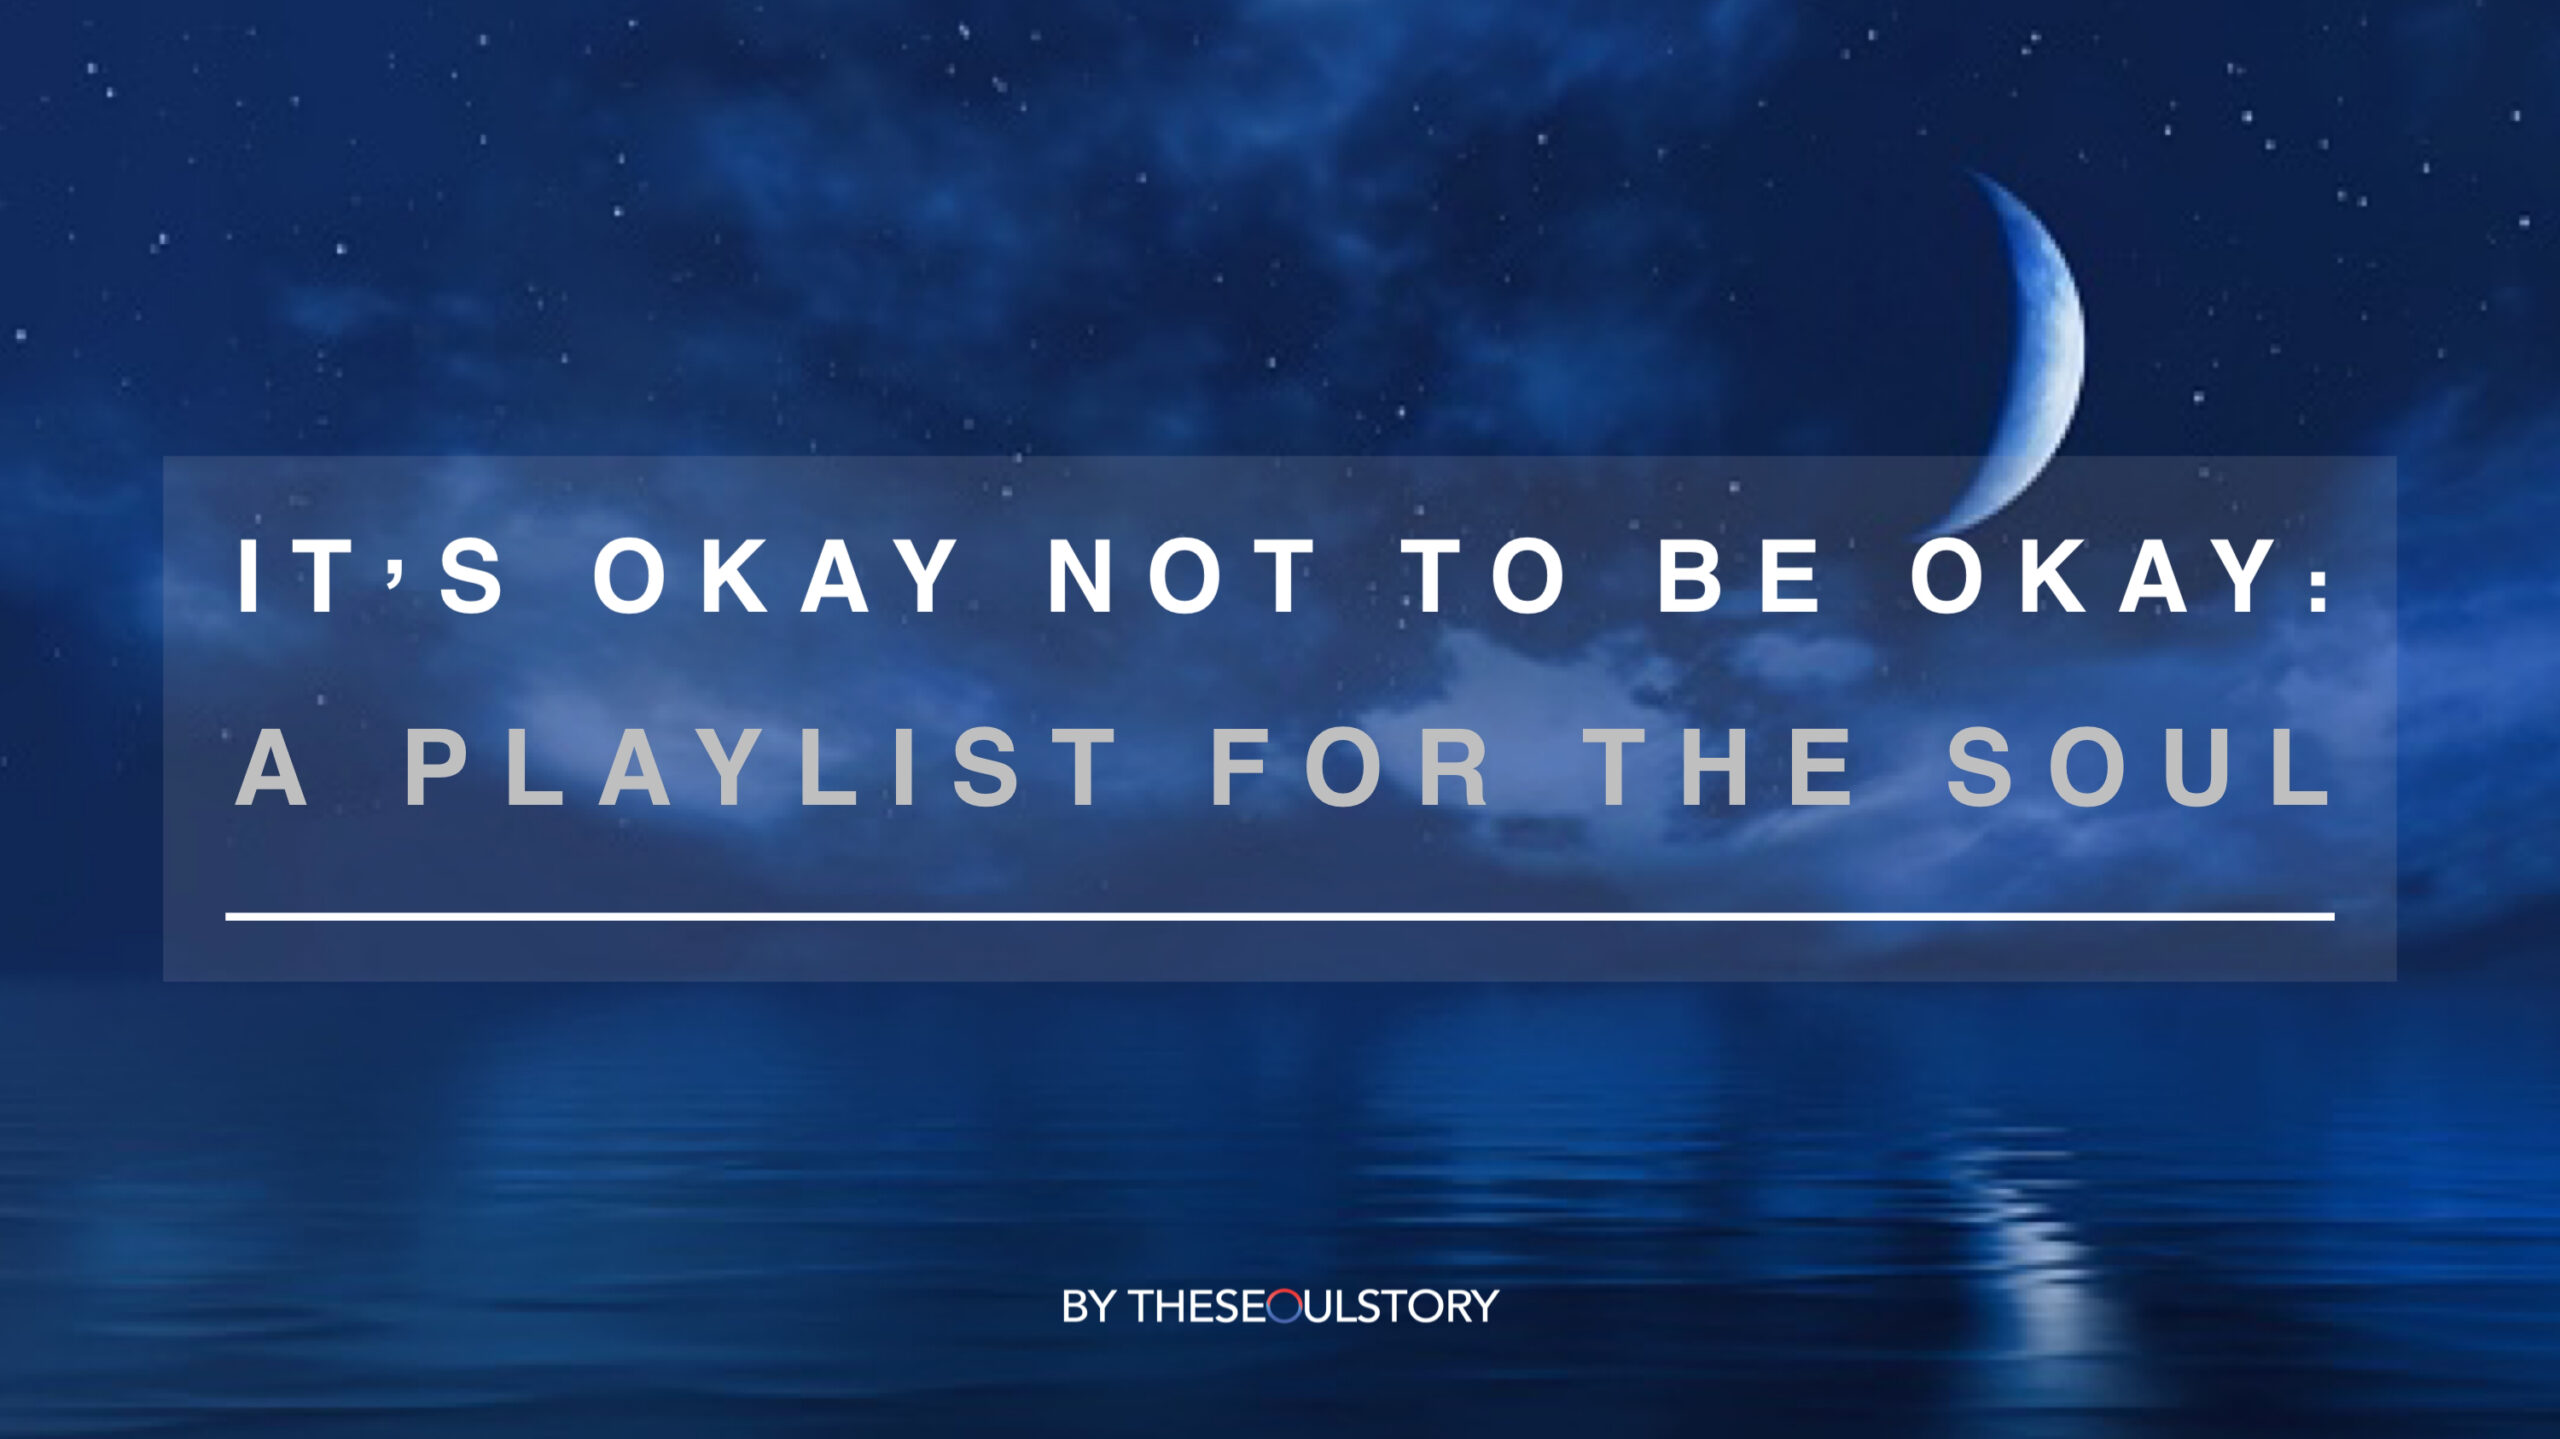 [FEATURE] It’s Okay Not To Be Okay : A Playlist For The Soul